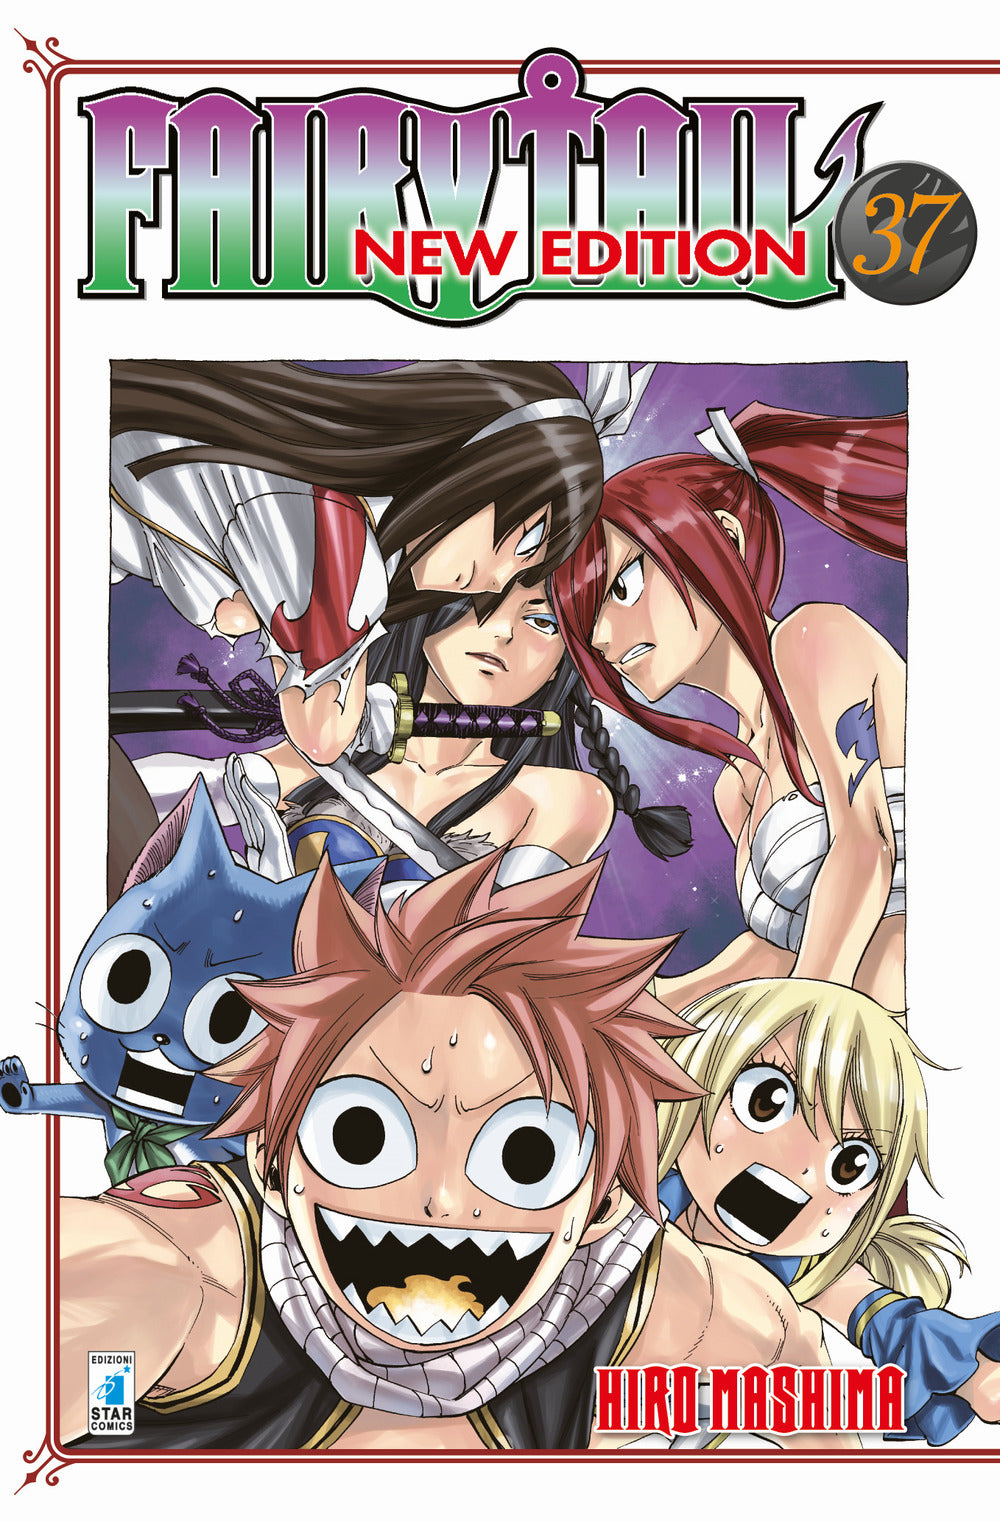 Fairy Tail. New edition. Vol. 37.